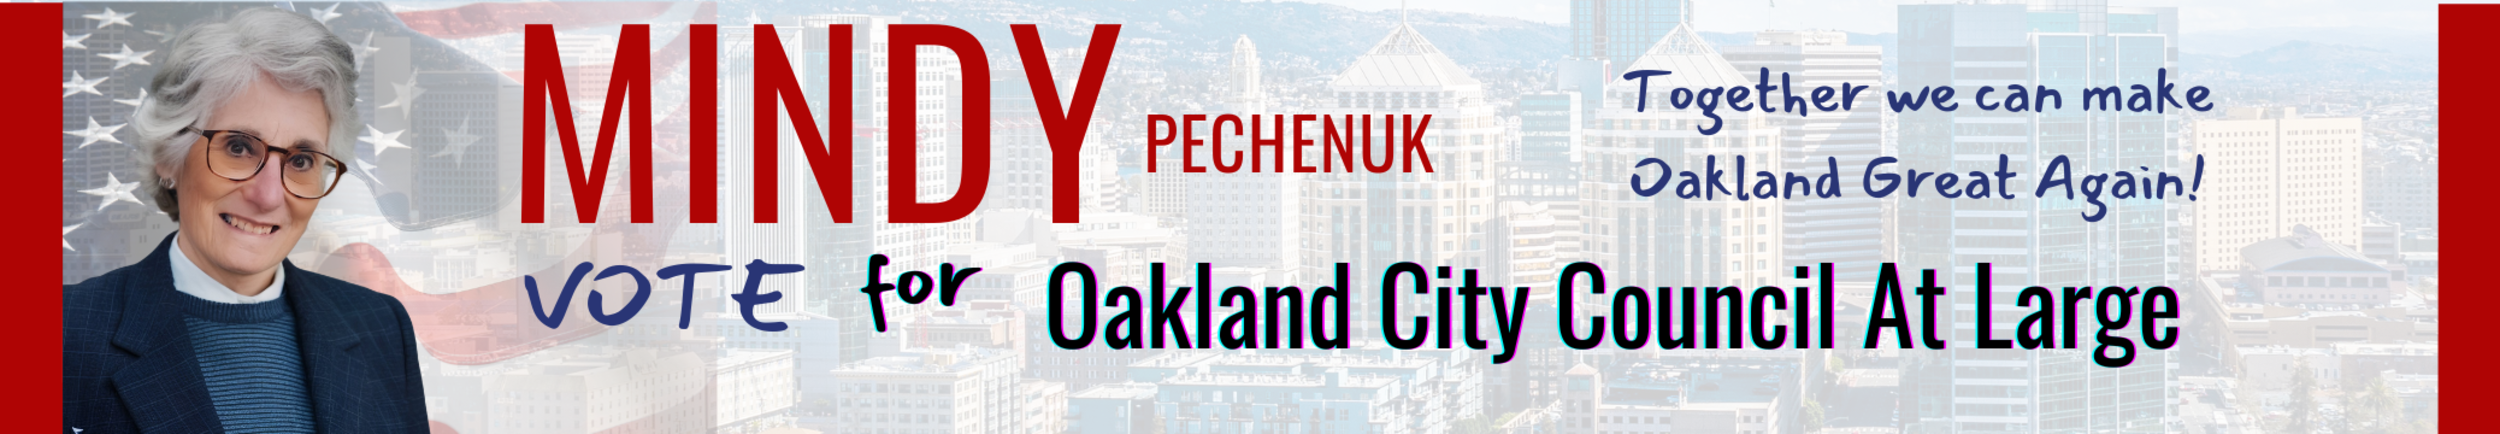 Mindy Pechenuk for Oakland City Council At Large